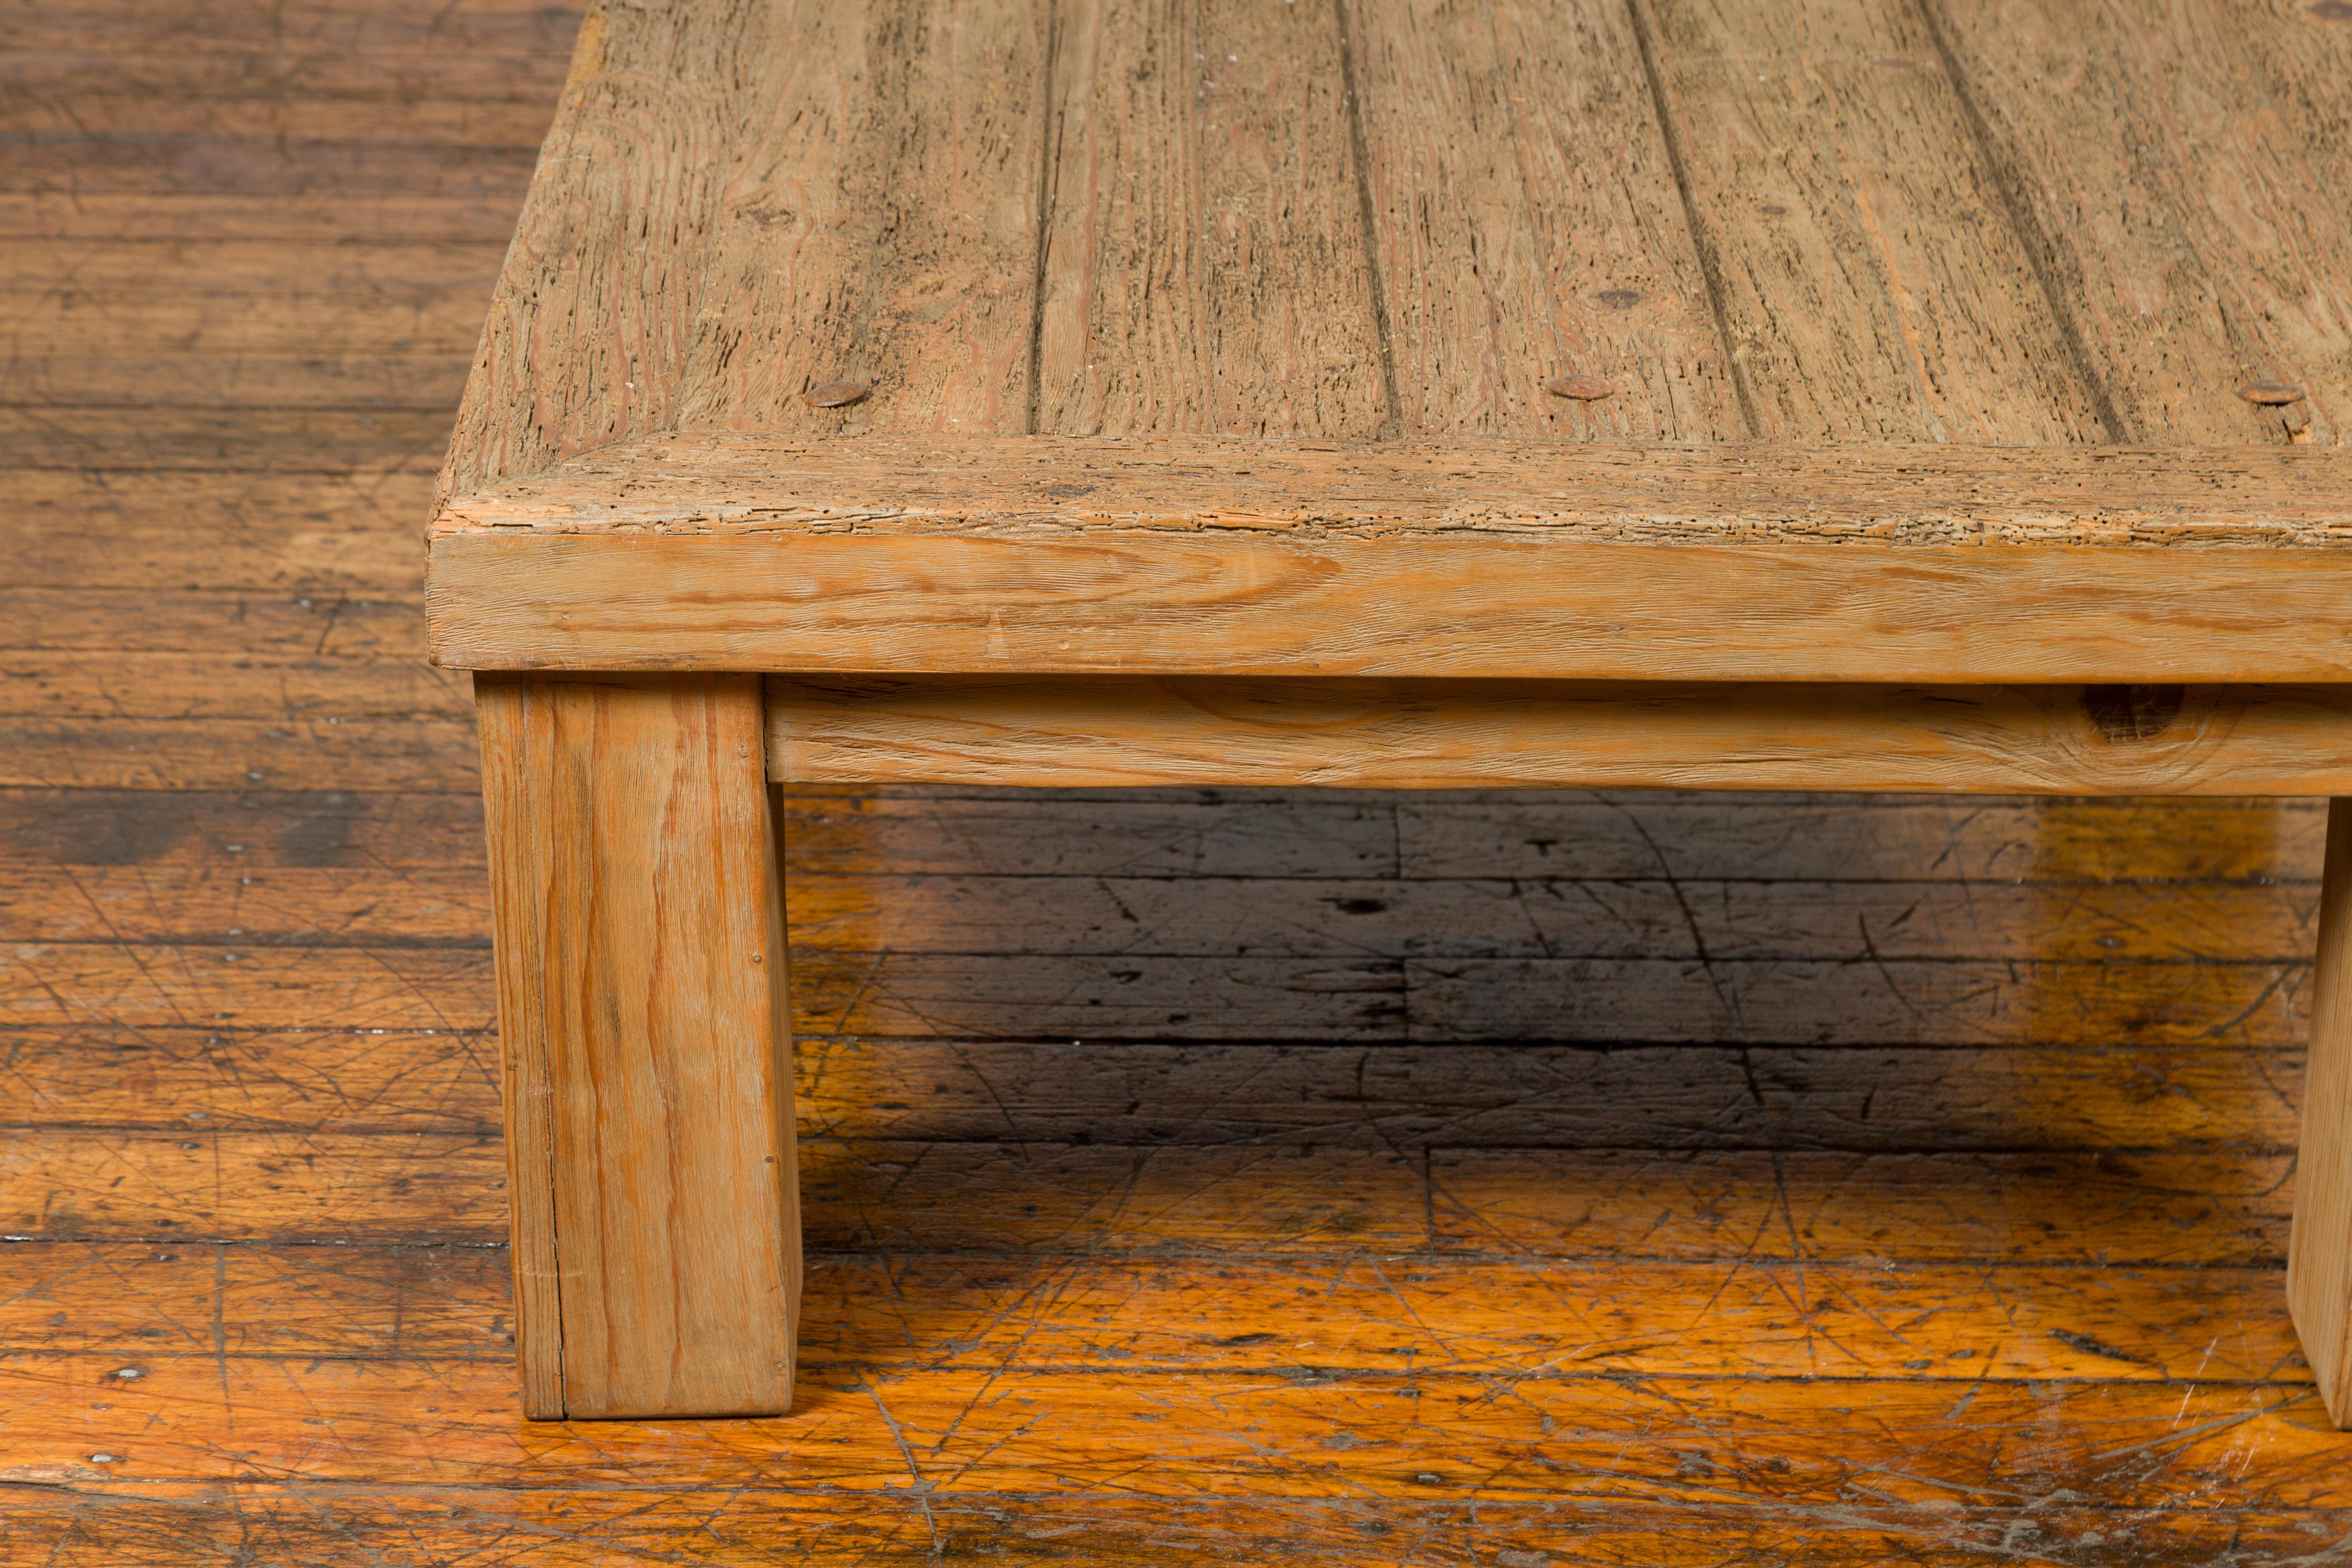 Rustic Vintage Driftwood Midcentury Coffee Table from Mexico with Square Legs